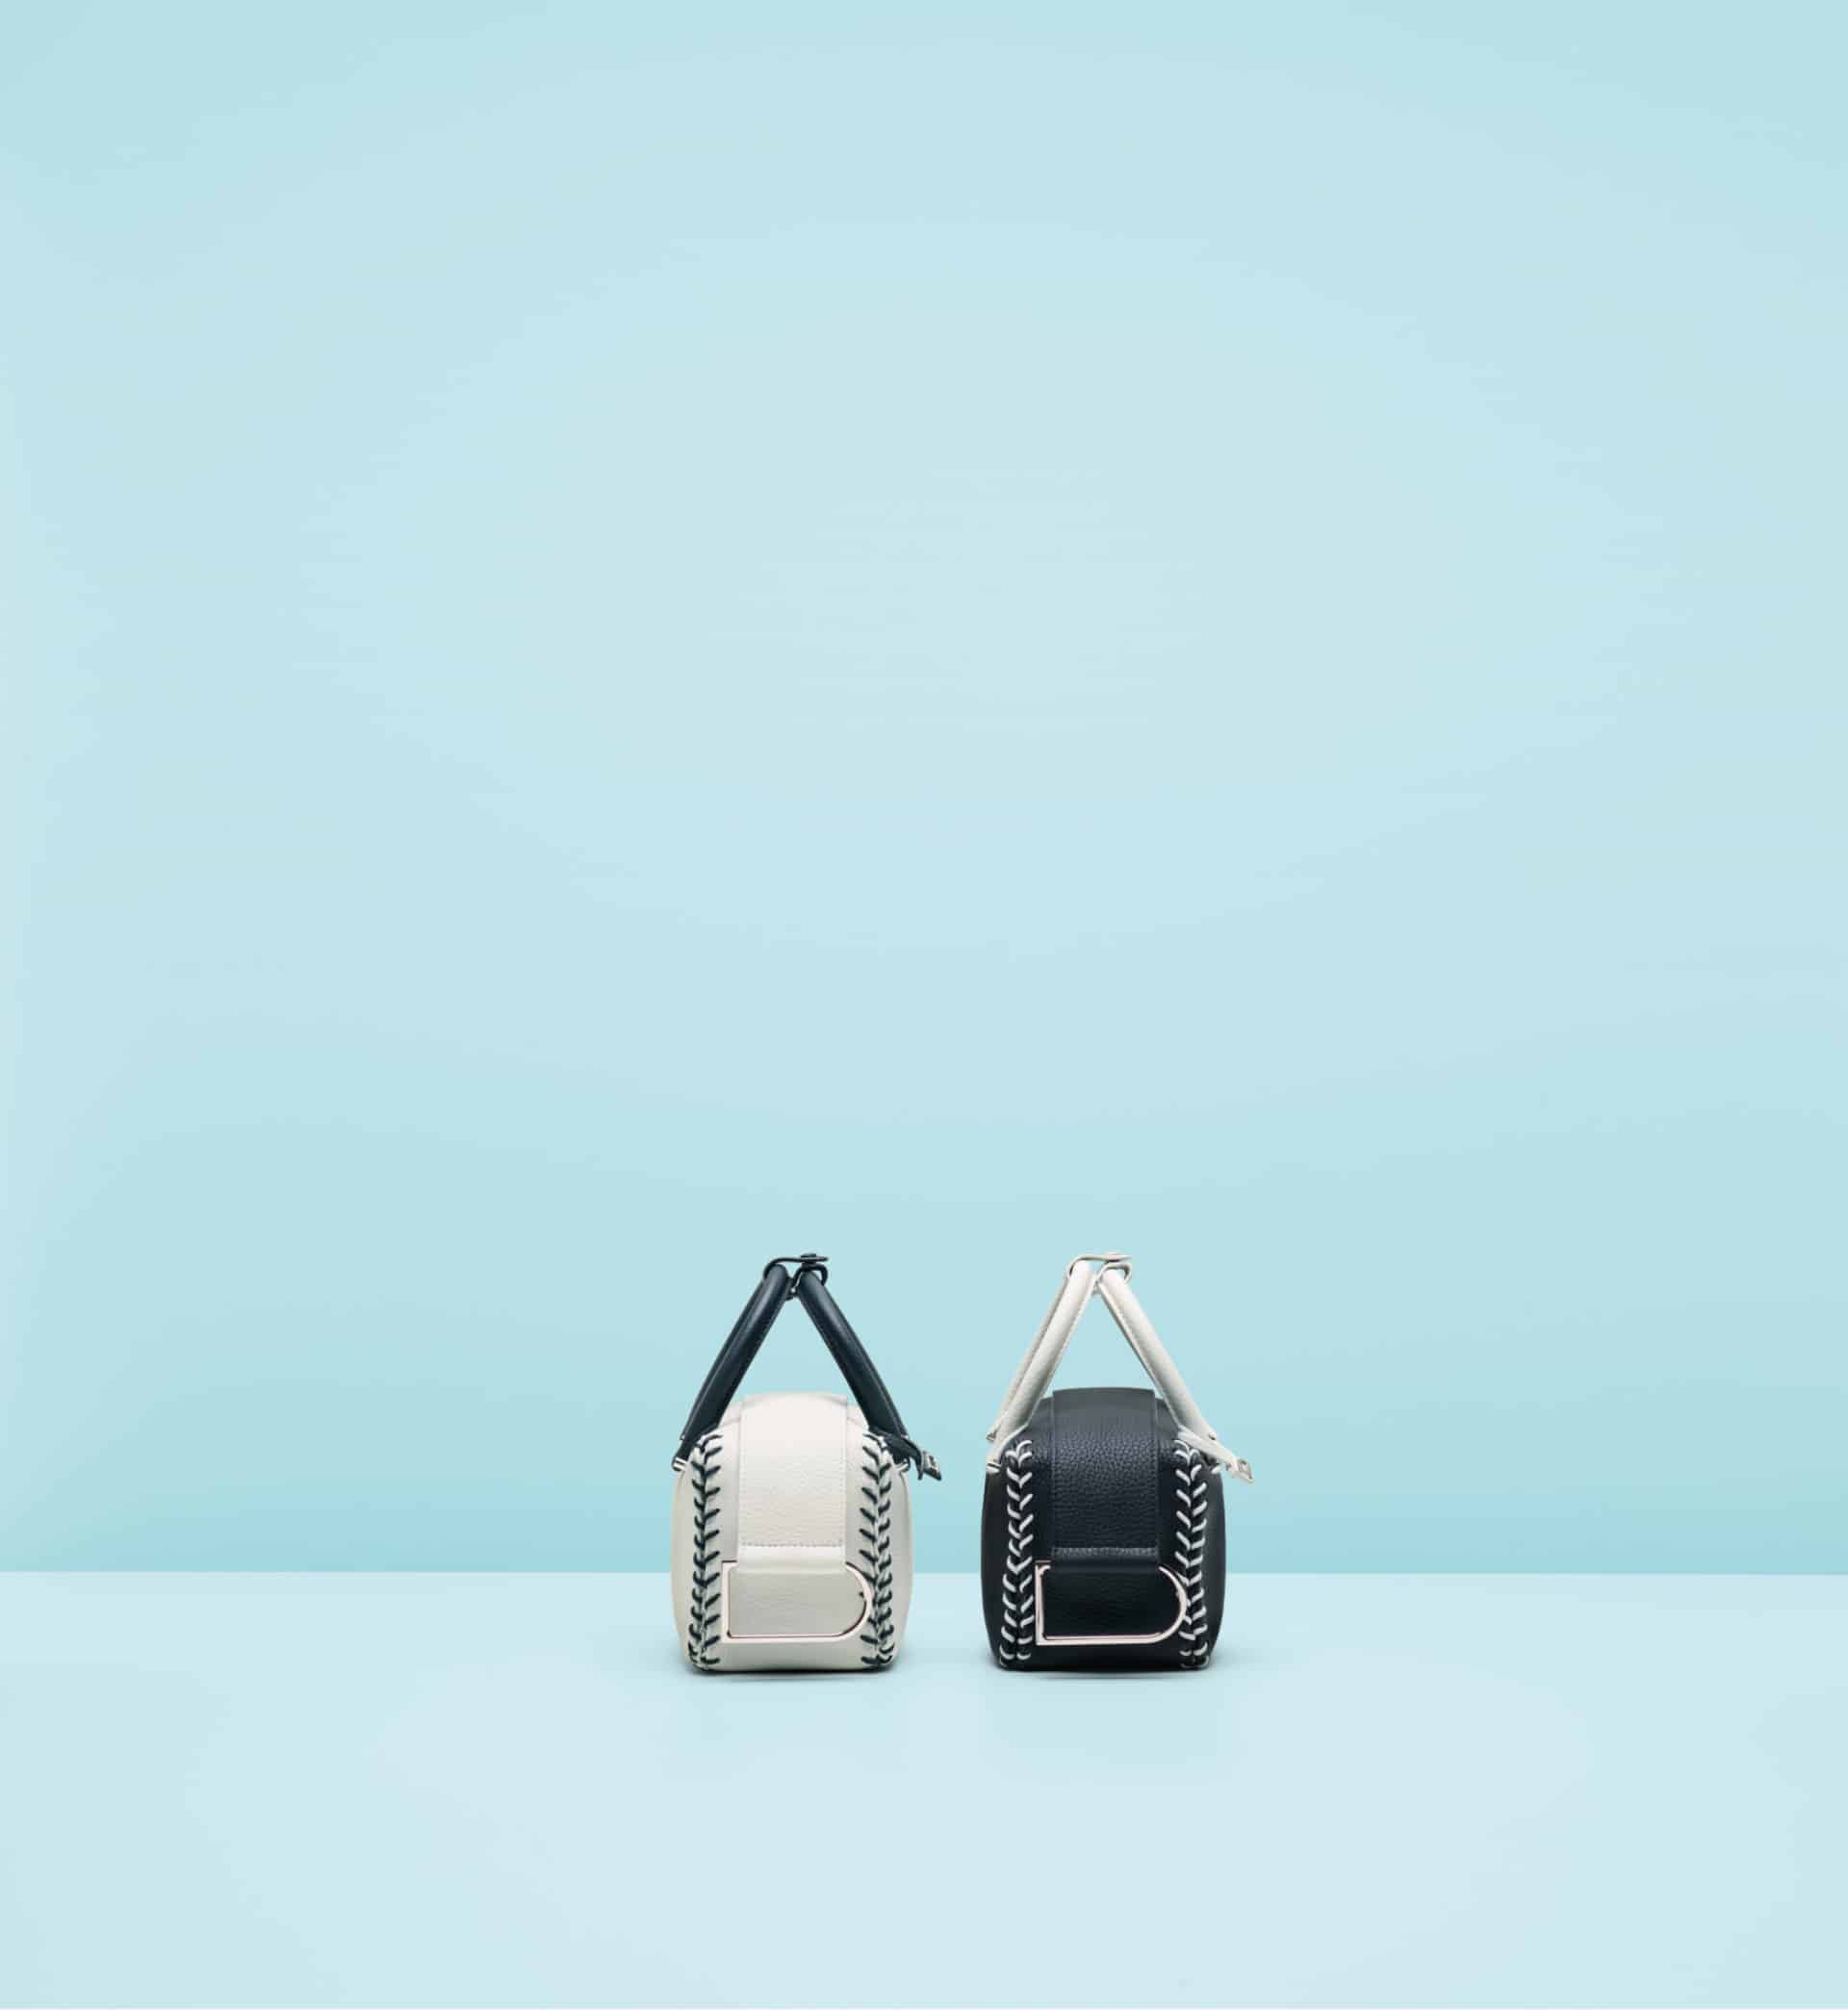 Delvaux - Our Spring Mini Bags Collection ticks all the right